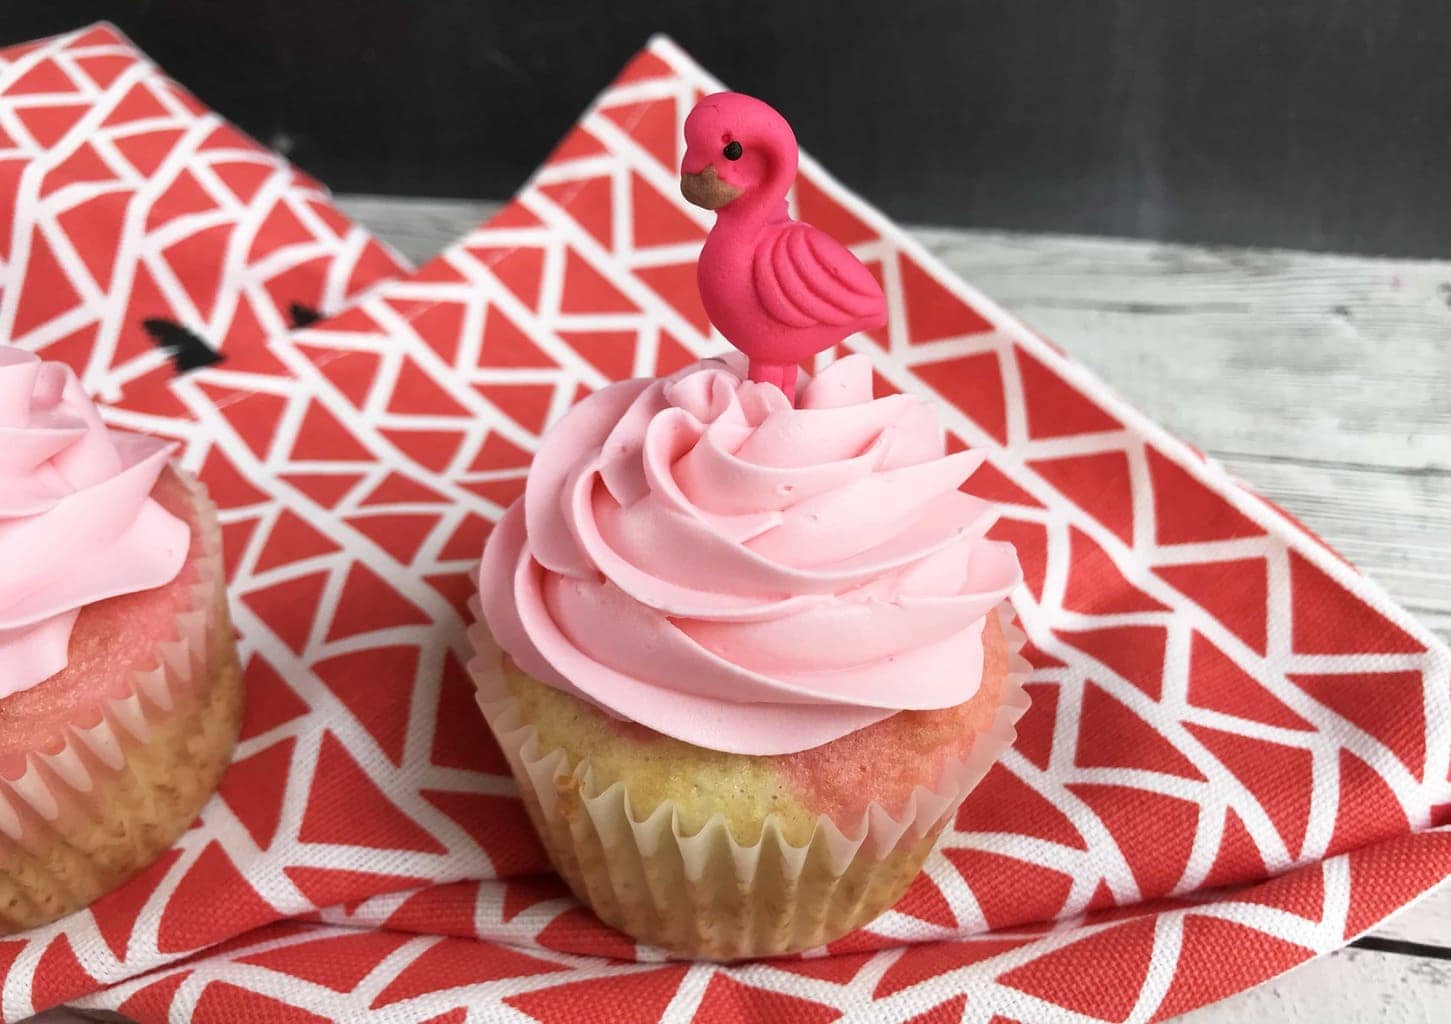 flamingo cupcakes with pink icing and a flamingo candy on top